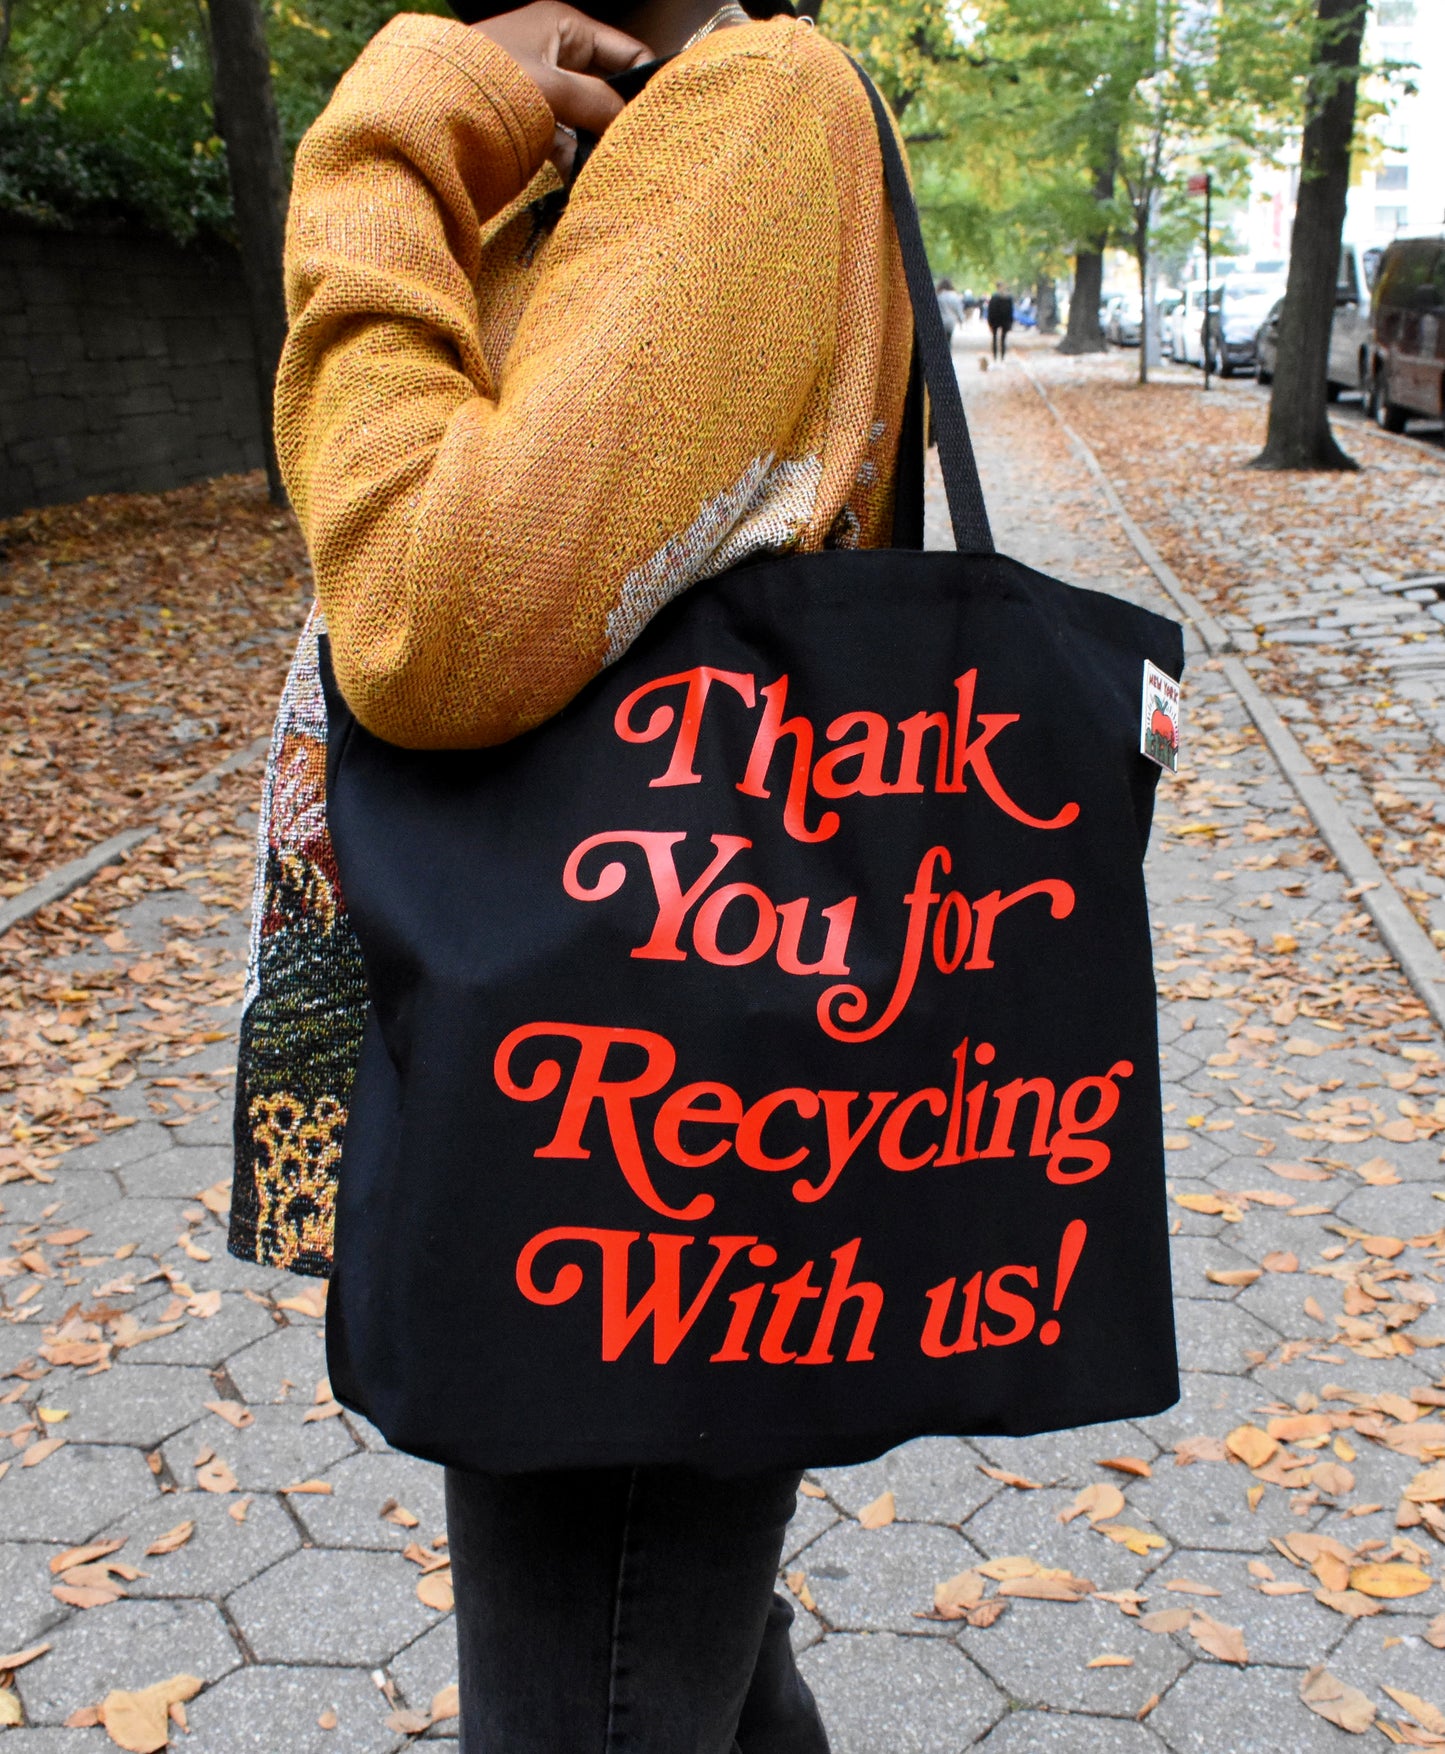 Thank You For Recycling With Us Jumbo Black Canvas Tote